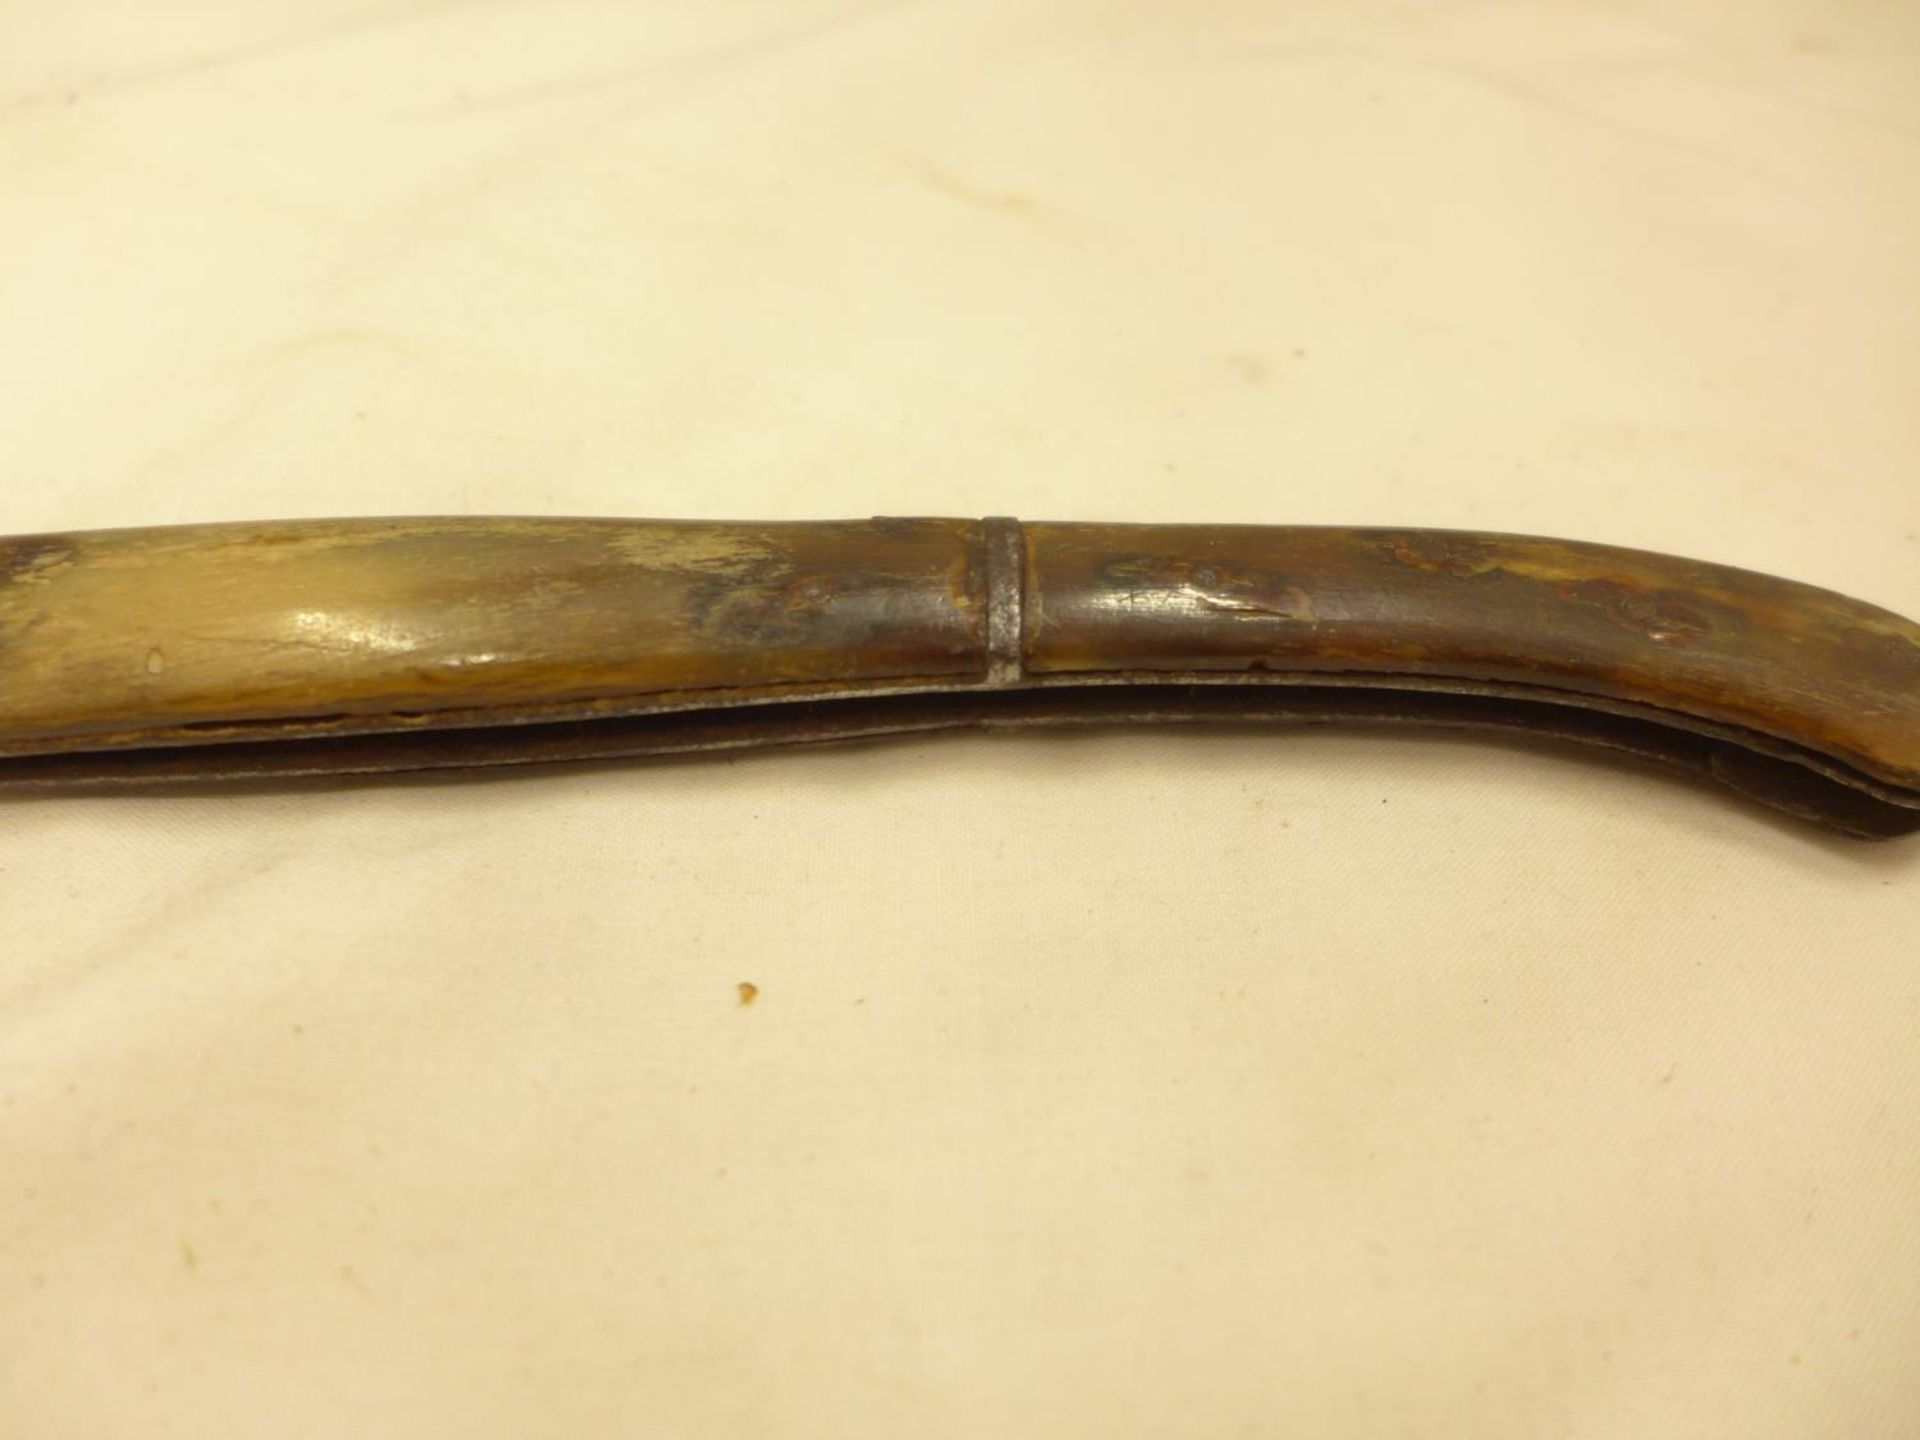 A VINTAGE FOLDING KNIFE WITH HORN GRIP, 14CM BLADE - Image 10 of 11